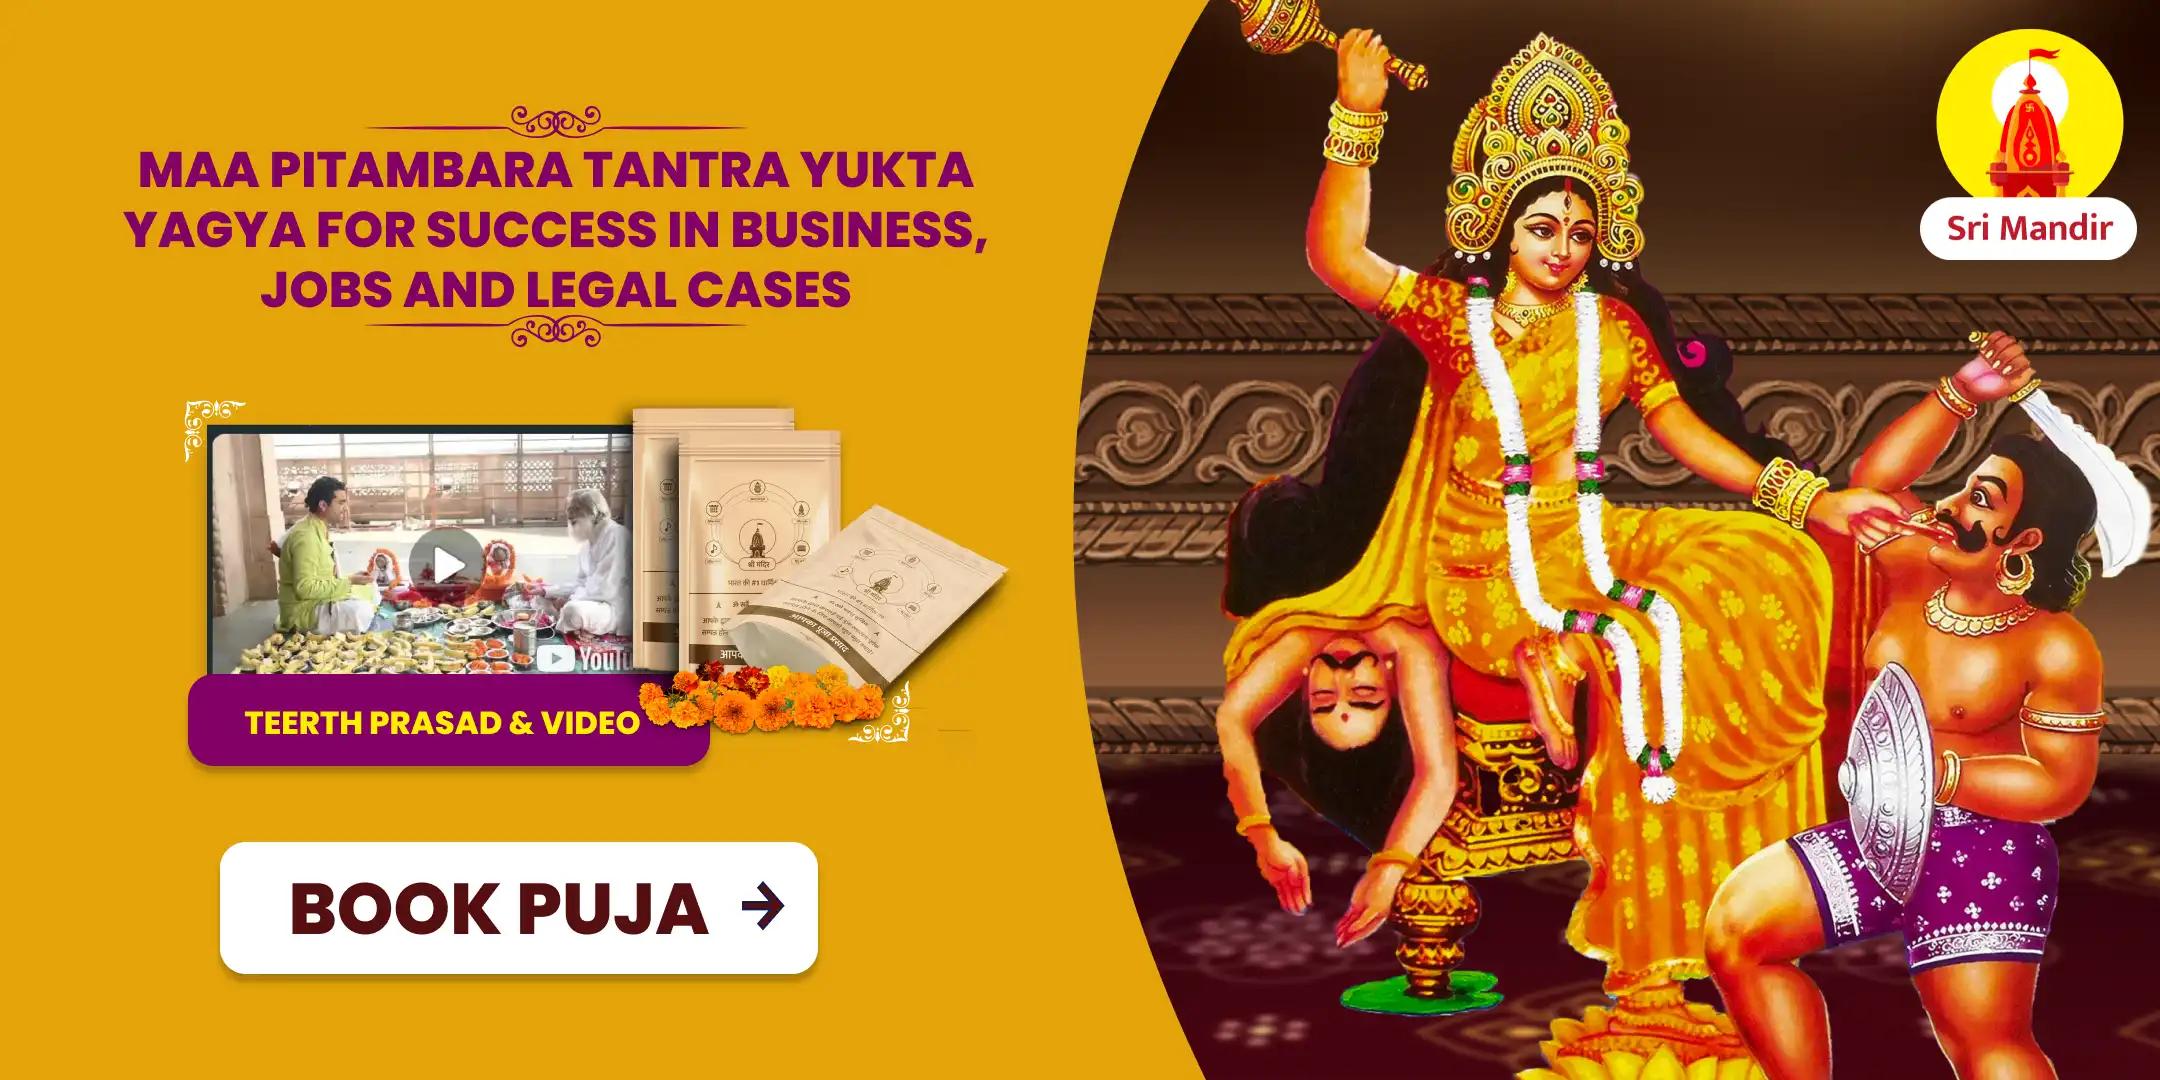 Maa Pitambara Tantra Yukta Yagya for Success in Business, Jobs and Legal Cases